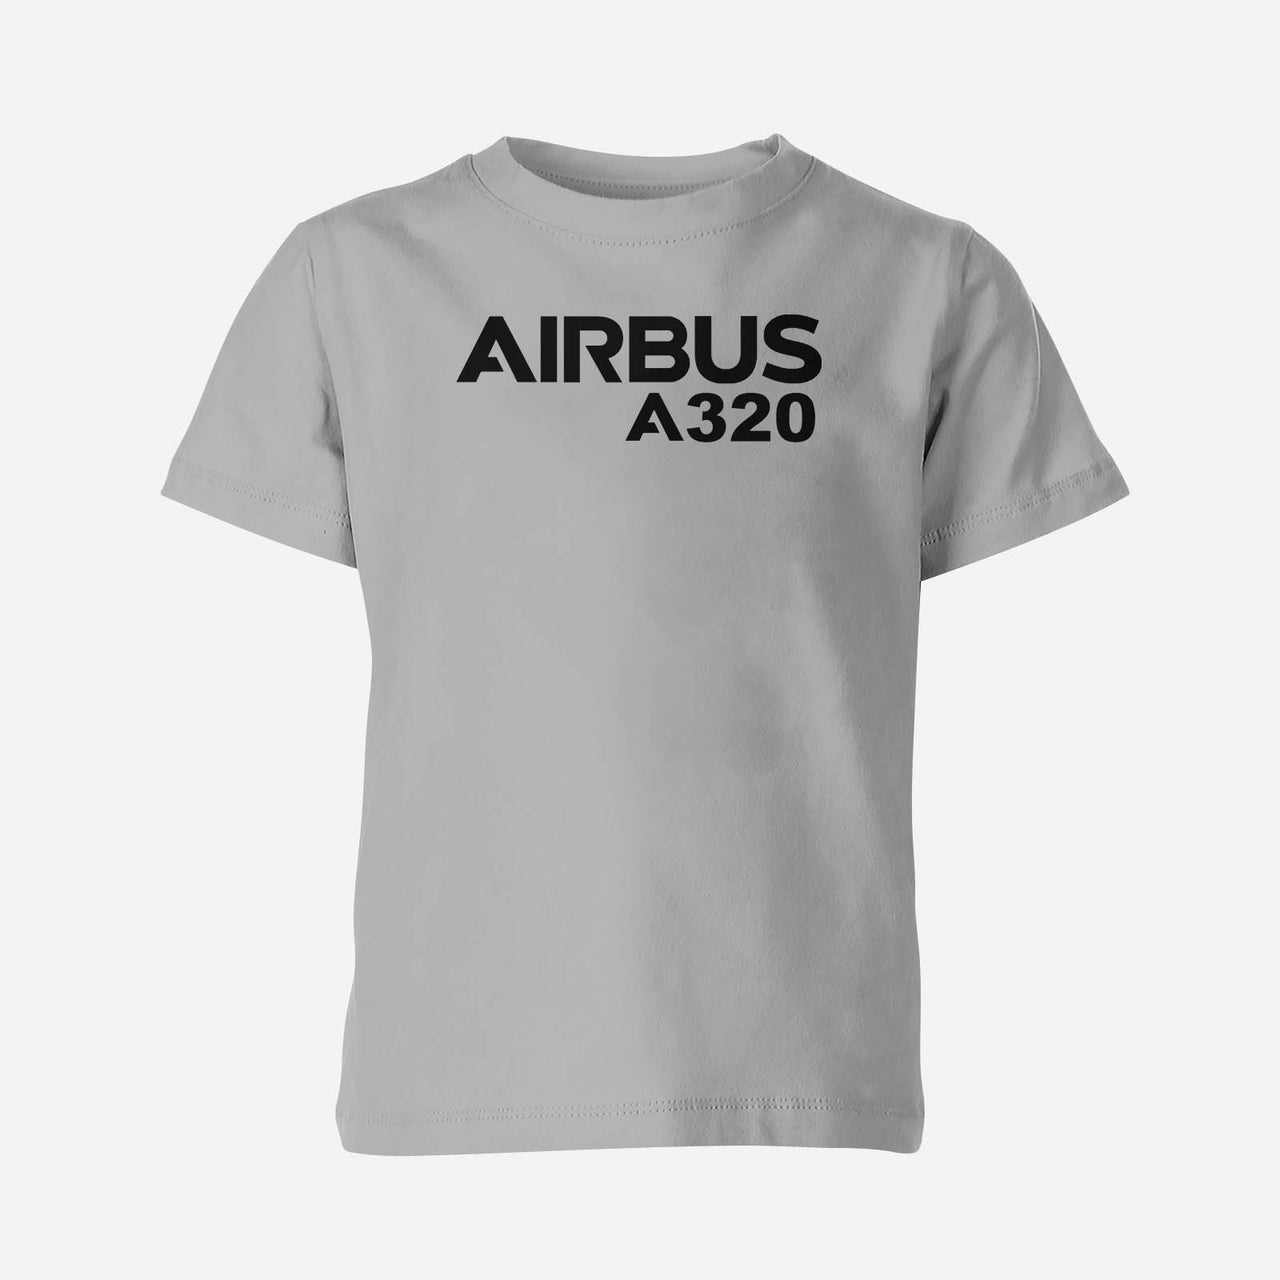 Airbus A320 & Text Designed Children T-Shirts